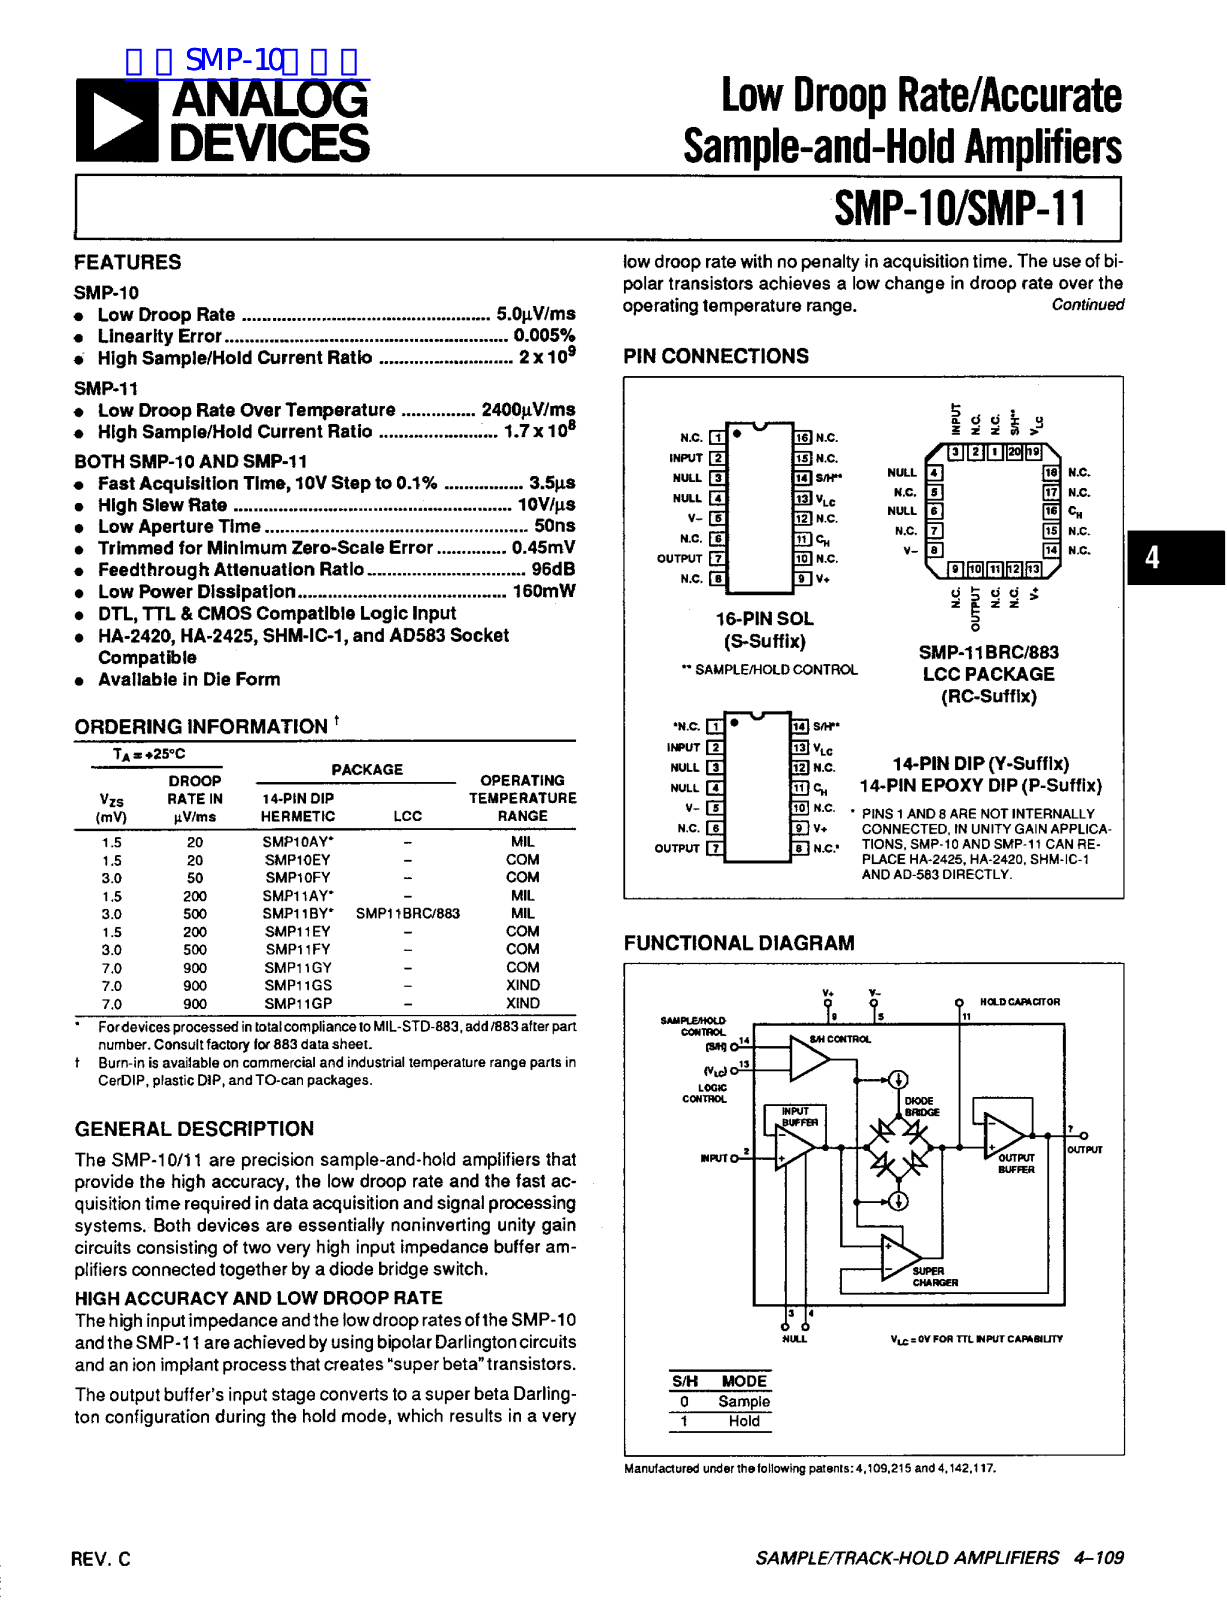 ANALOG DEVICES SMP-10, SMP-11 Service Manual